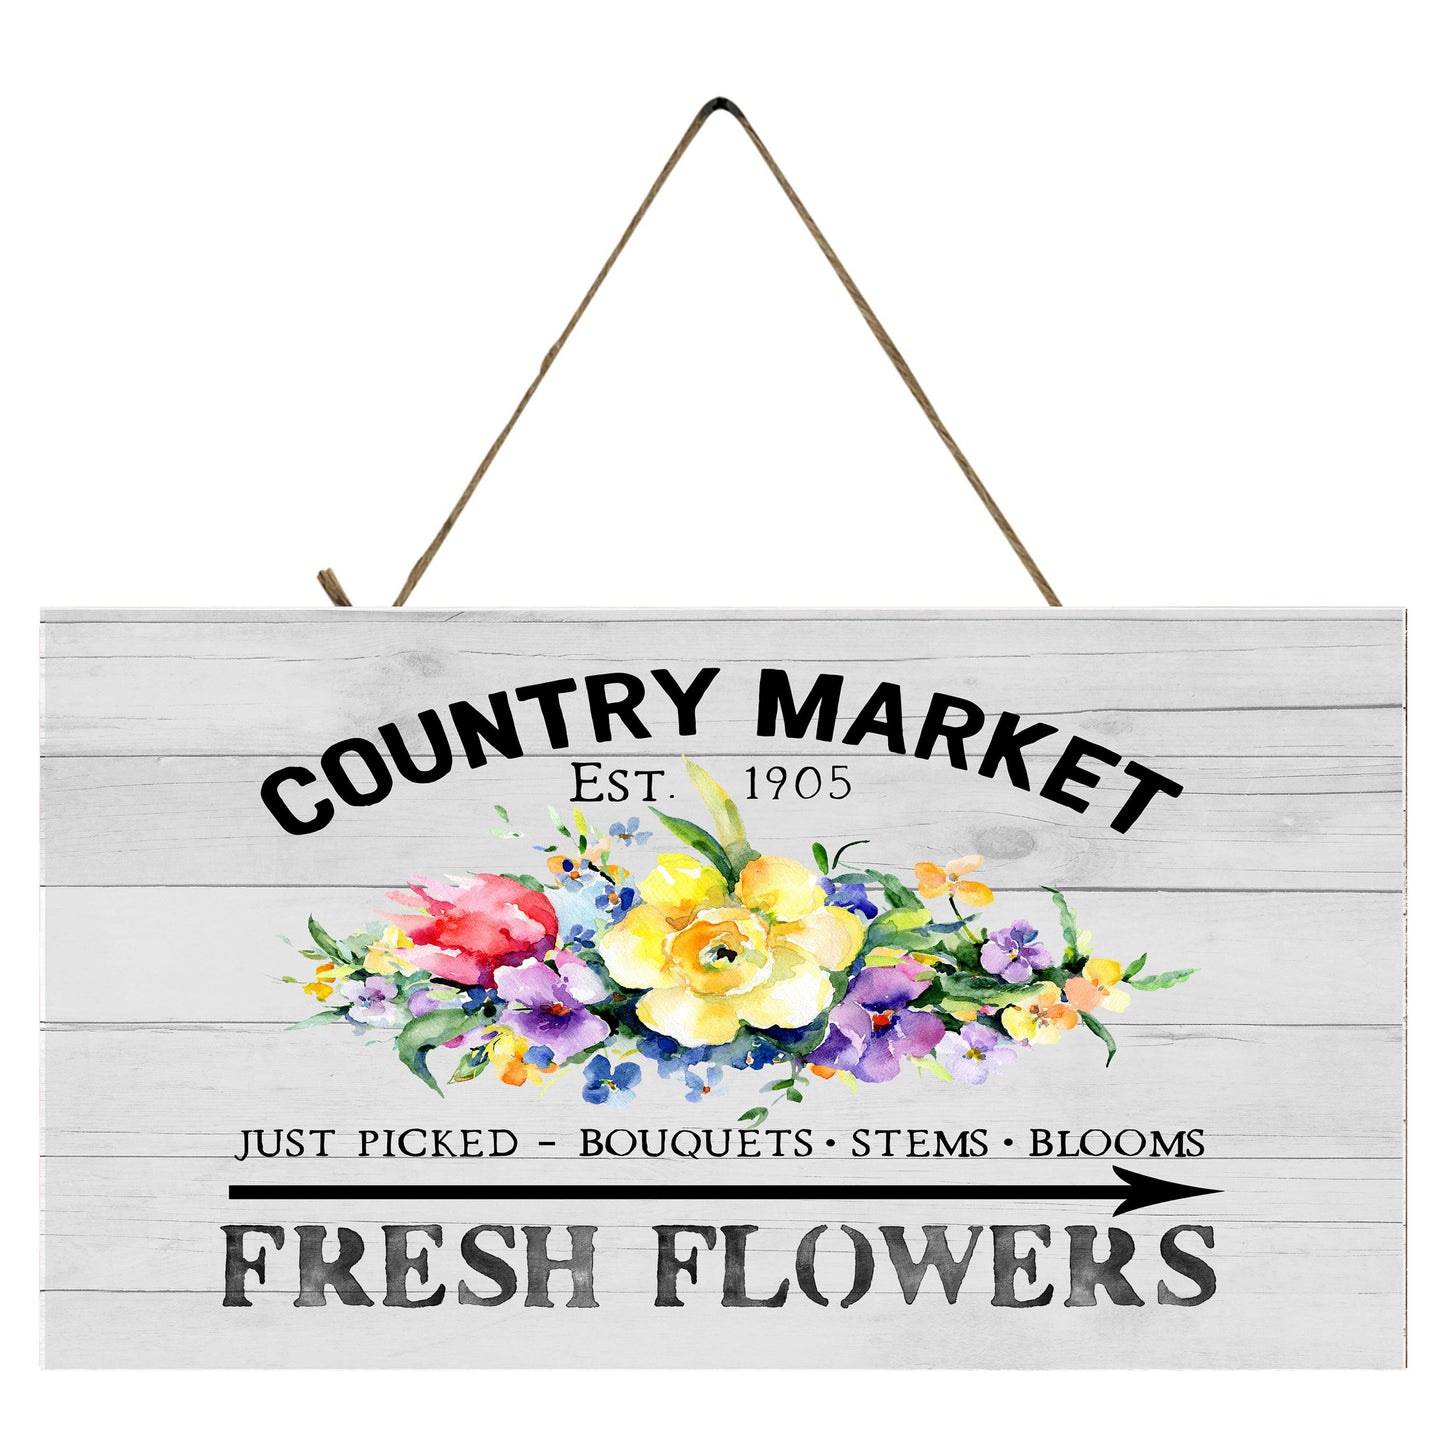 Farmhouse Country Market Flowers Printed Handmade Wood Sign